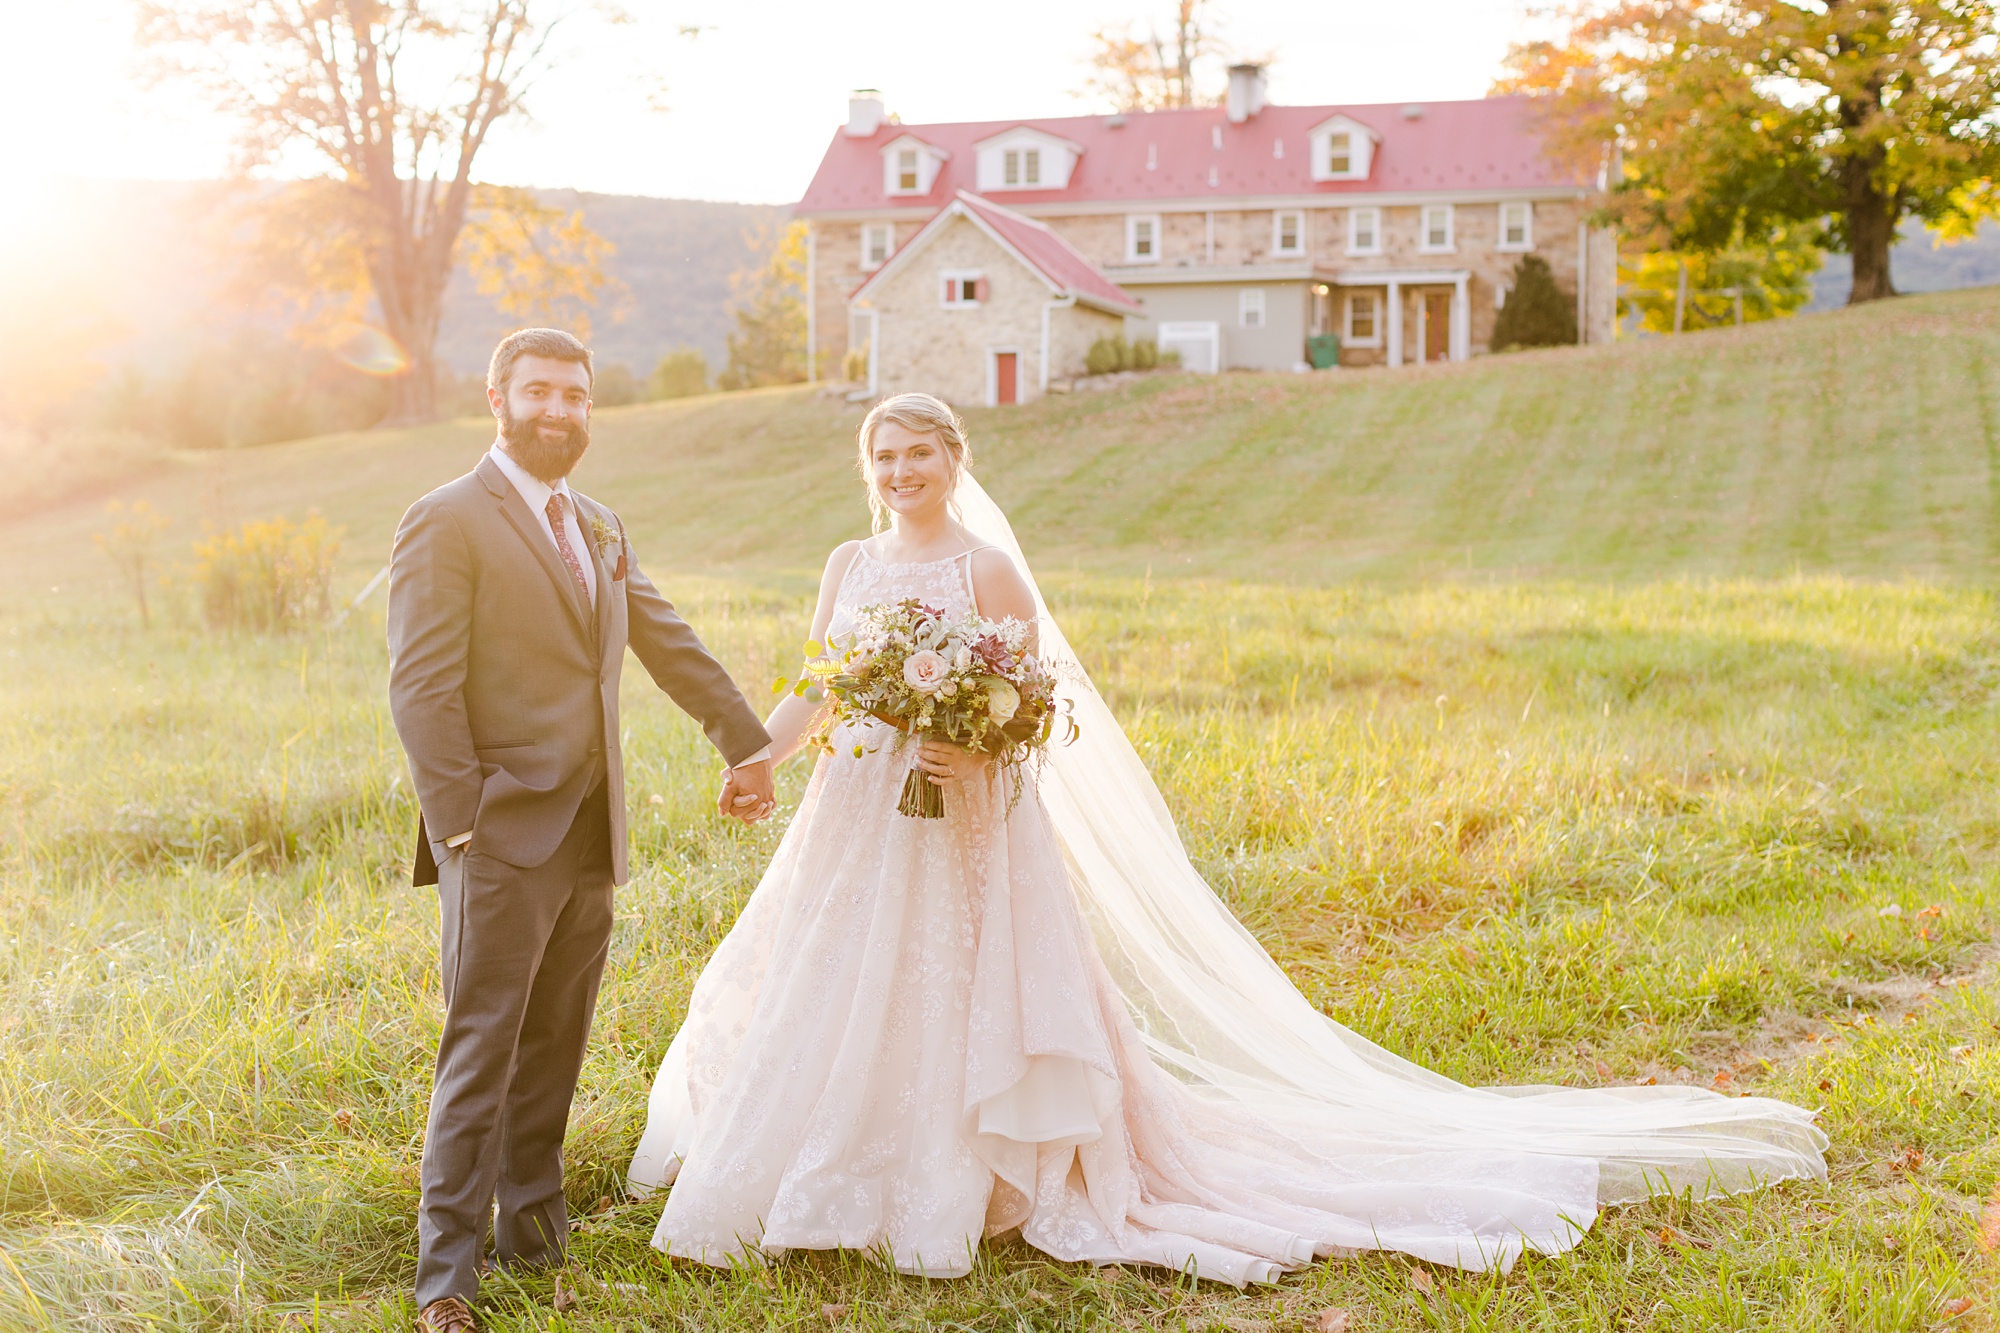 sun drenched wedding portraits in Pennsylvania 